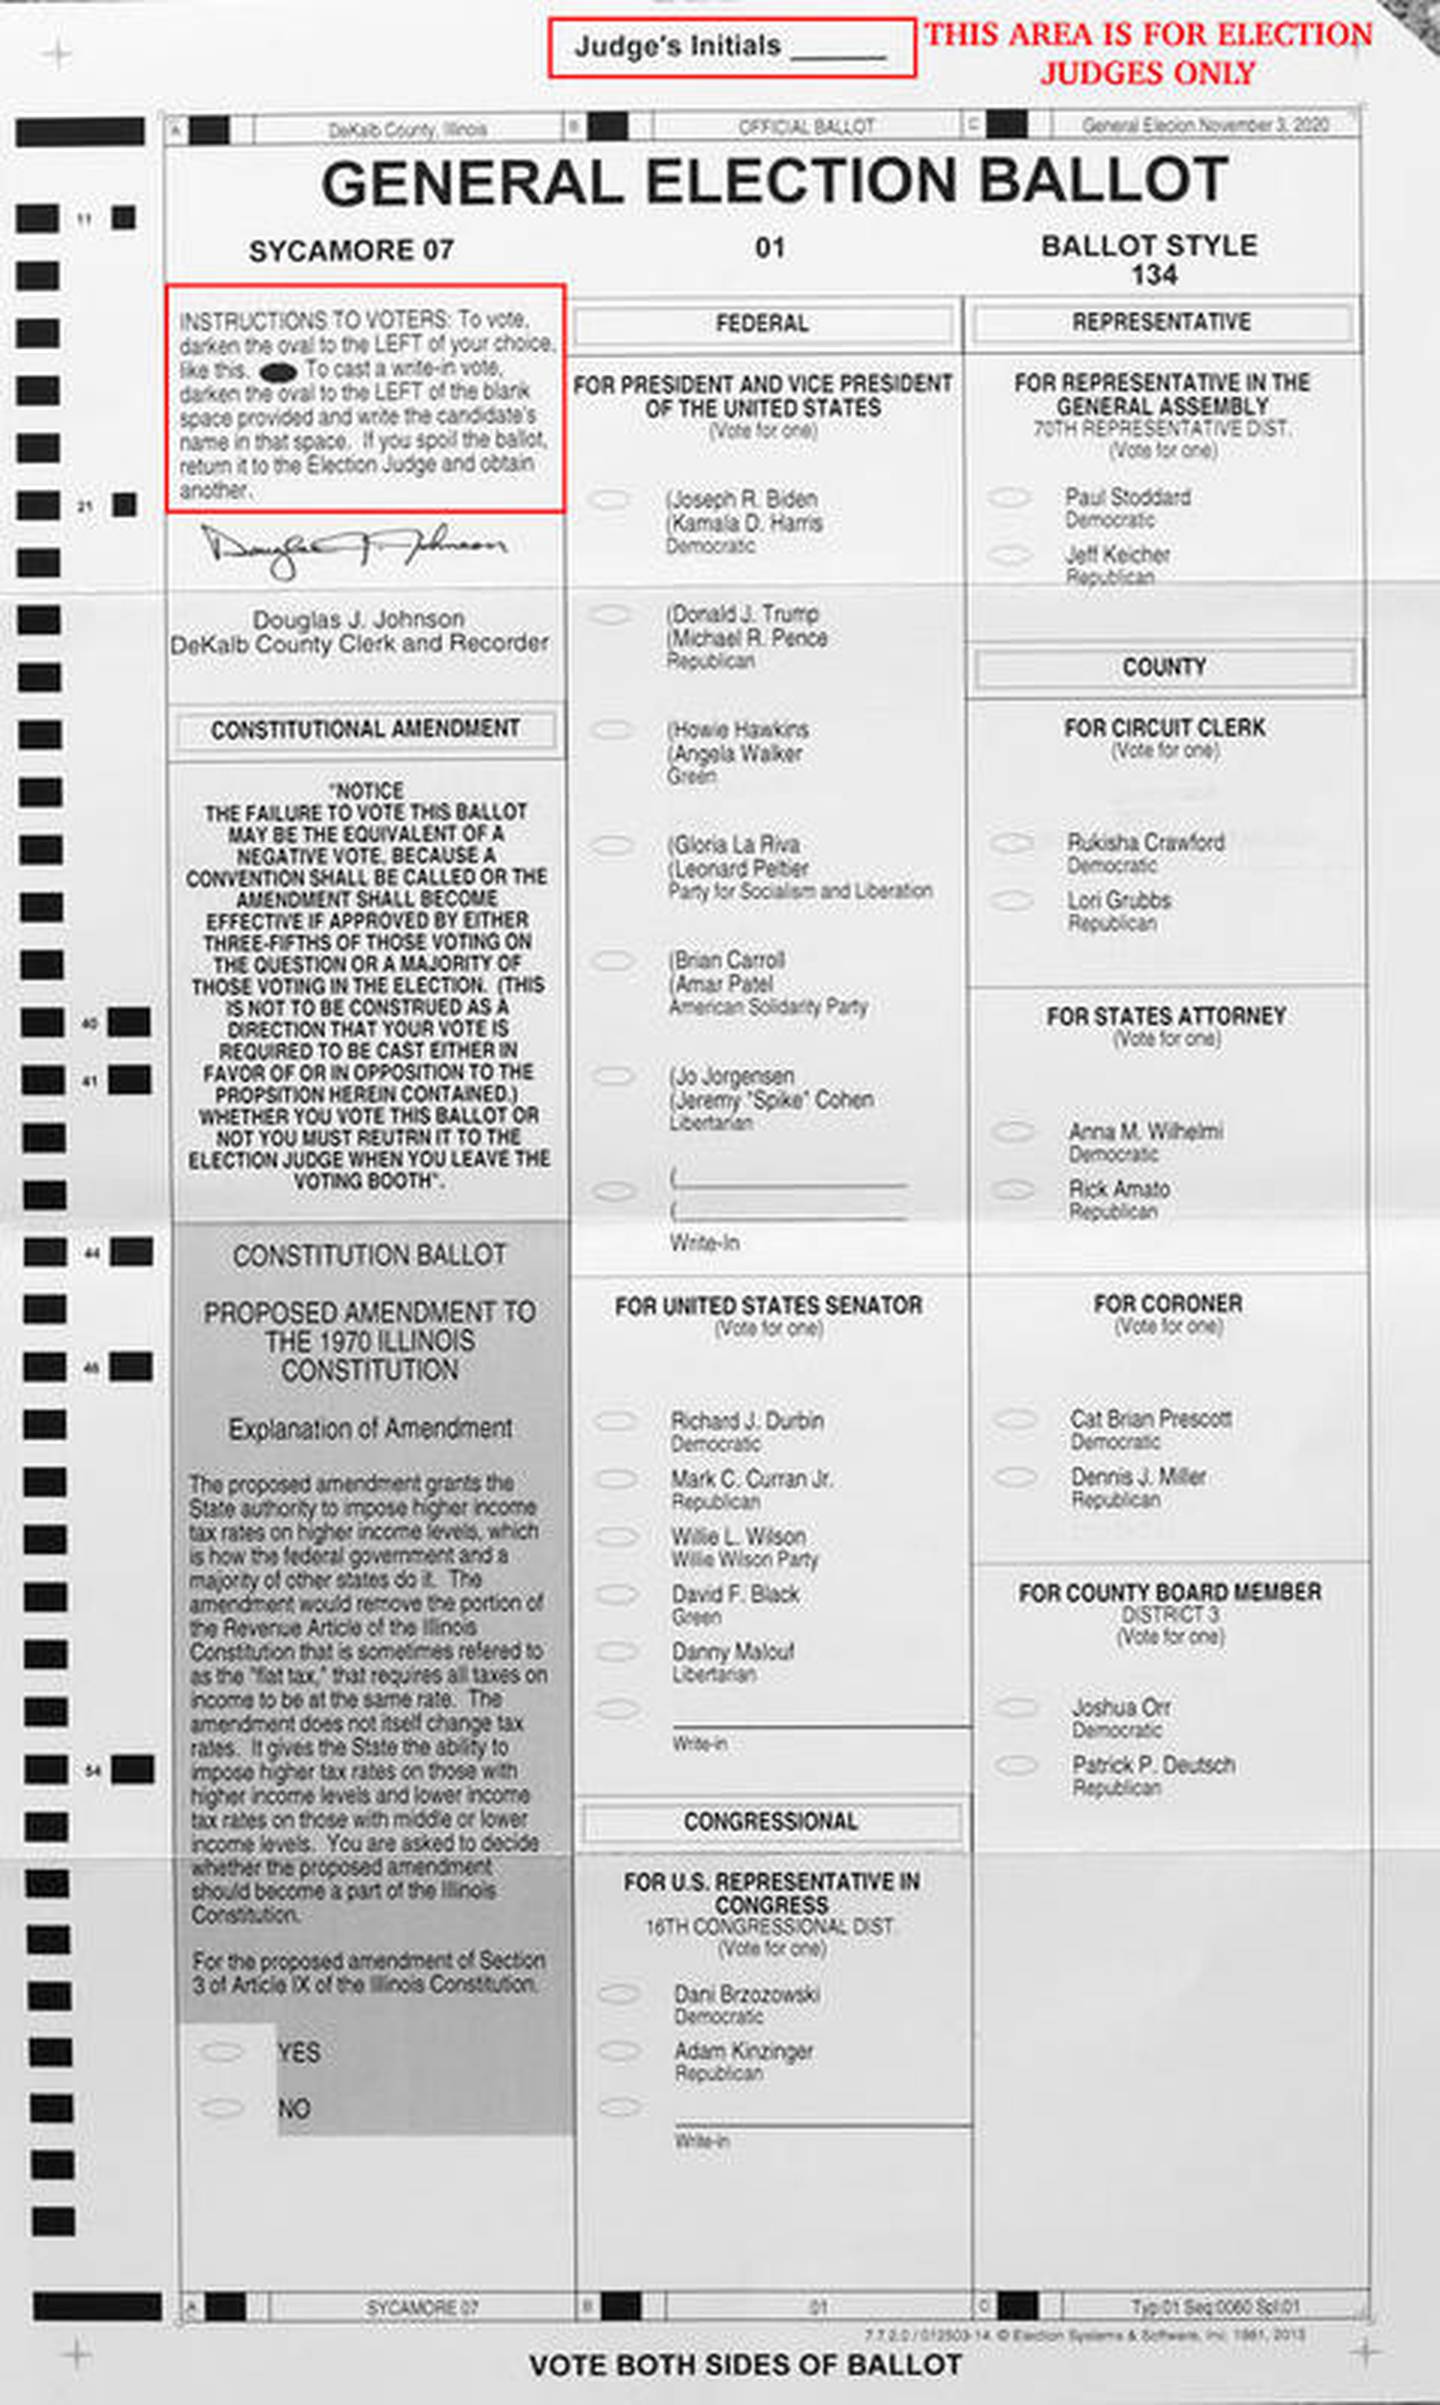 How to fill out and send a mailin ballot in Illinois Shaw Local